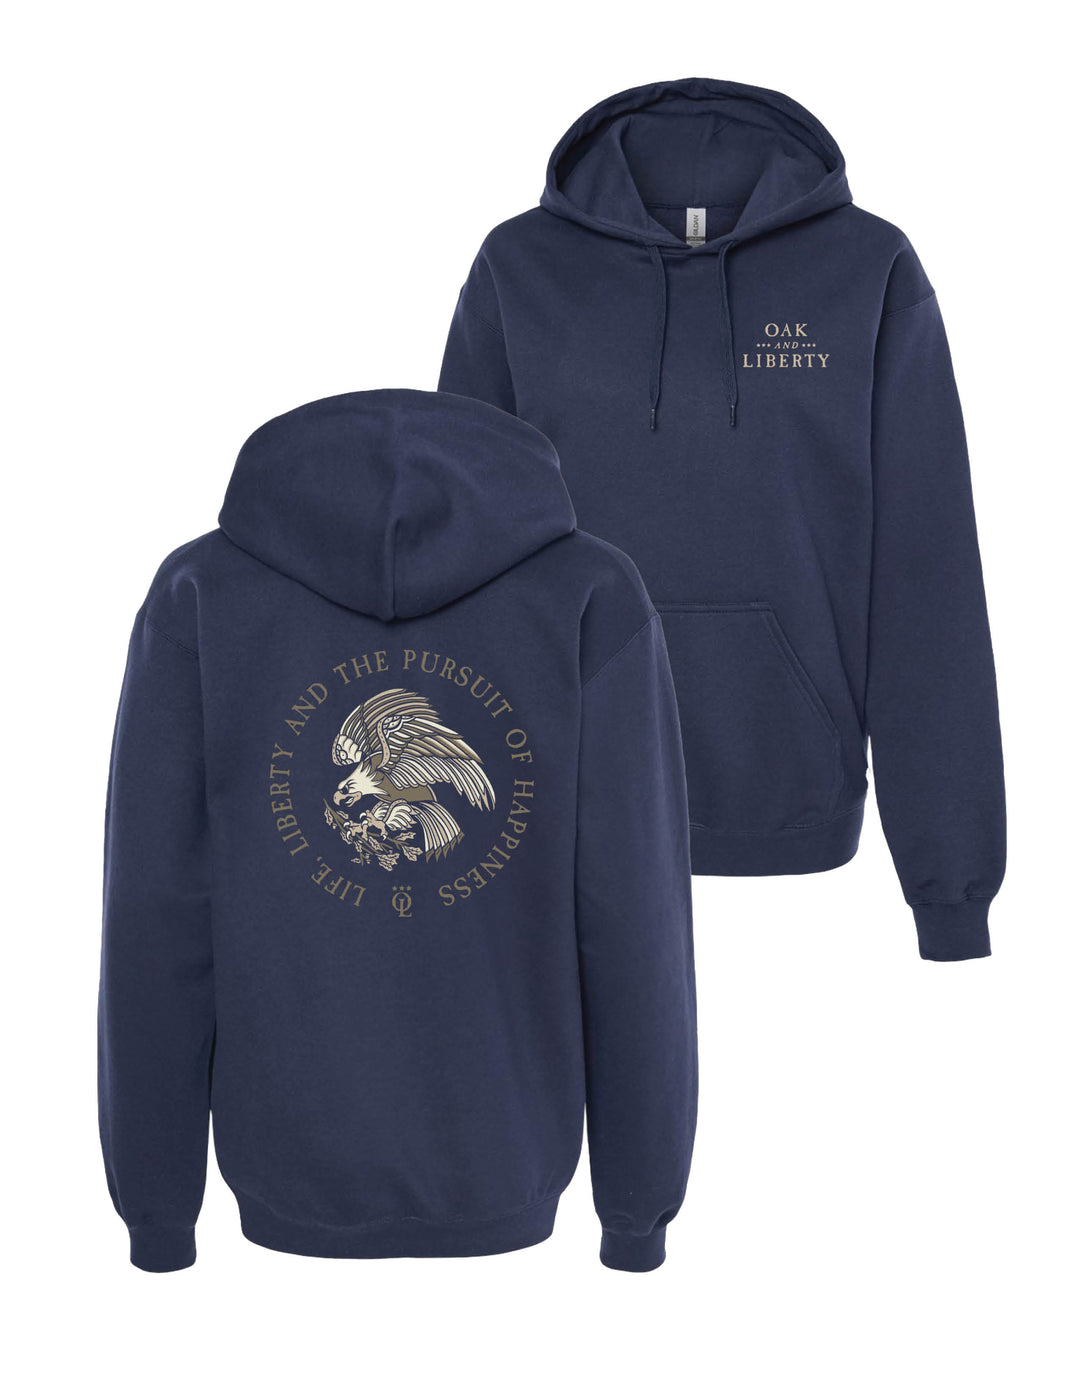 Life, Liberty and The Pursuit of Happiness Eagle Hoodie